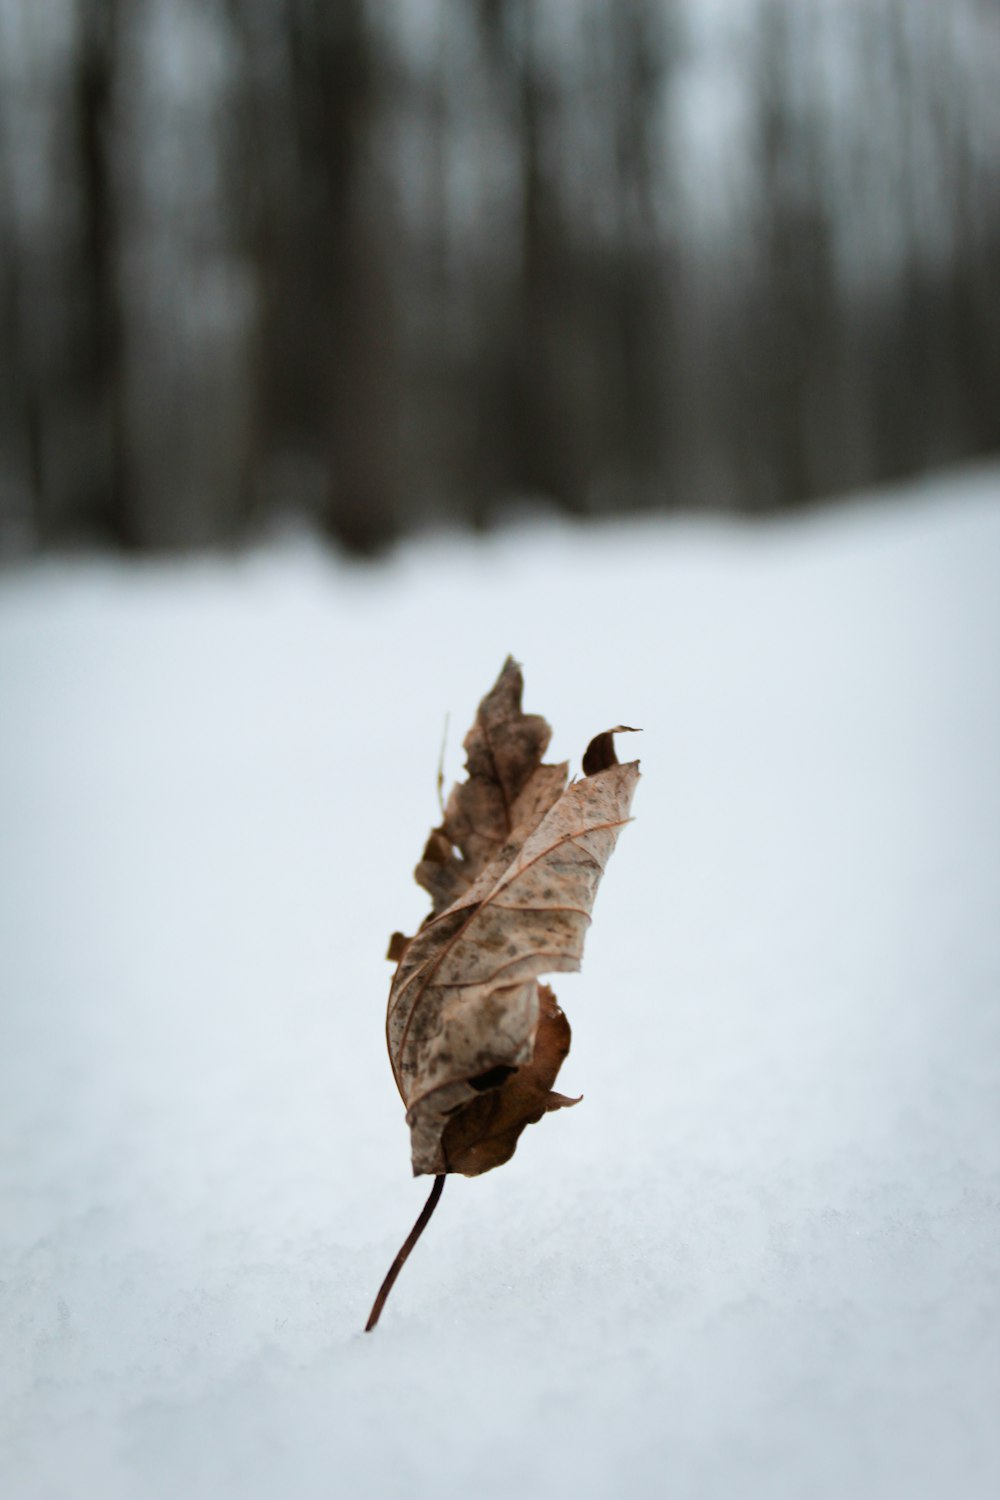 a dried leaf on the ground in the snow